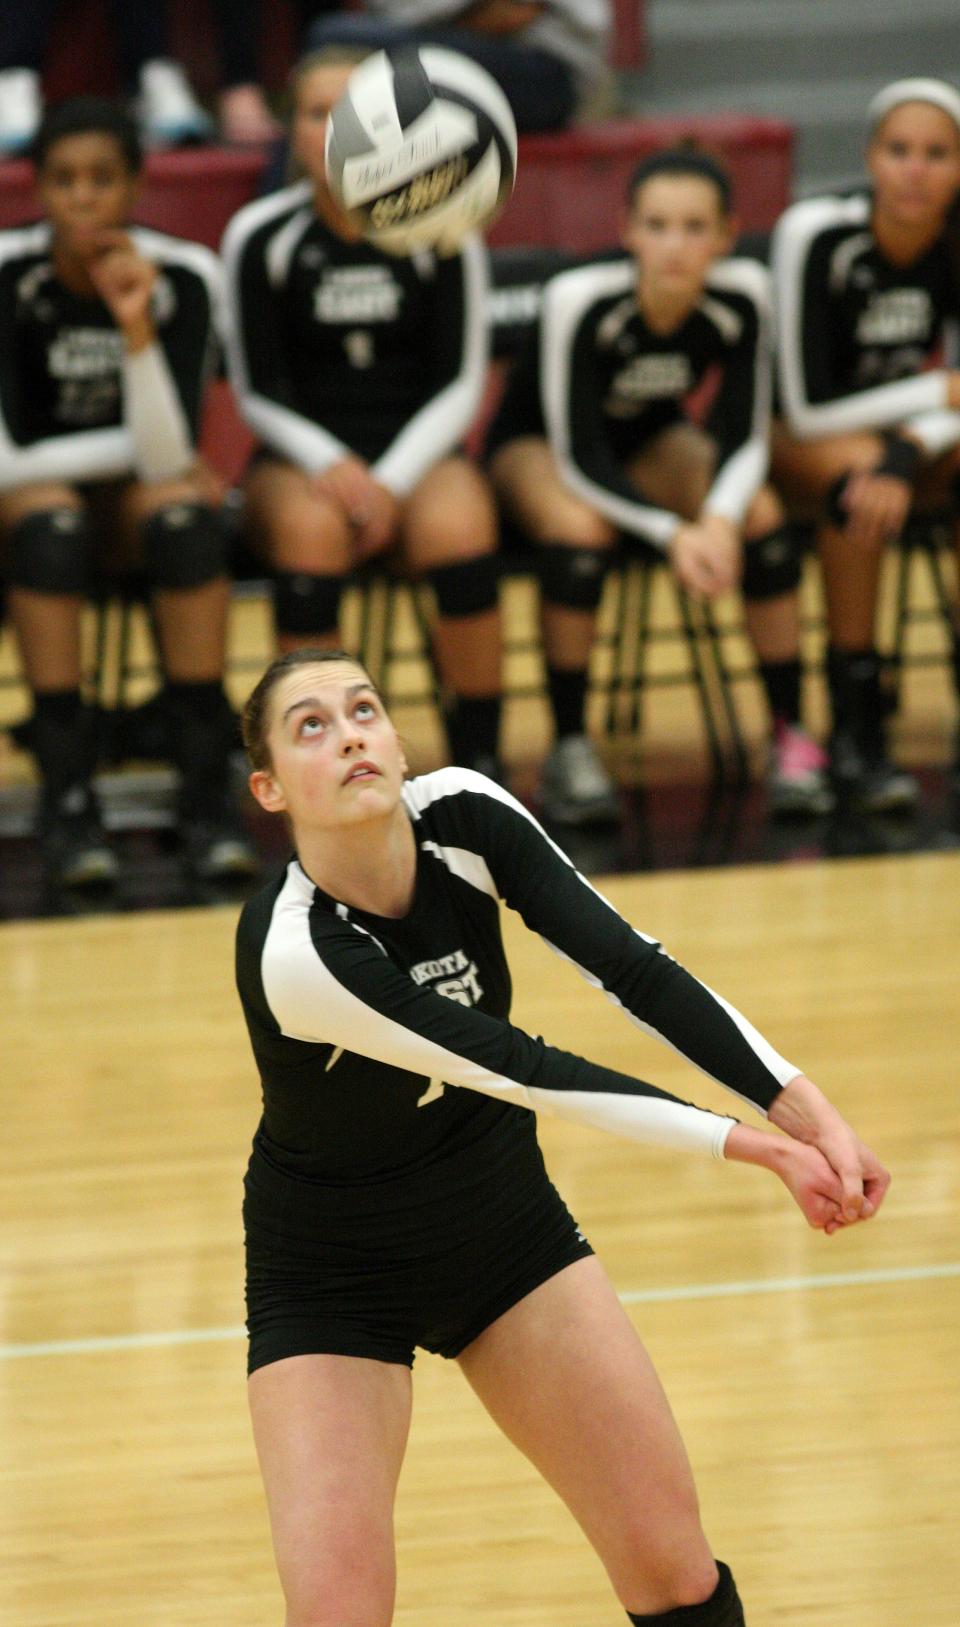 Ashley Evans, playing against St. Ursula for Lakota East in October 2012, will play professionally in the inaugural Pro Volleyball Federation.